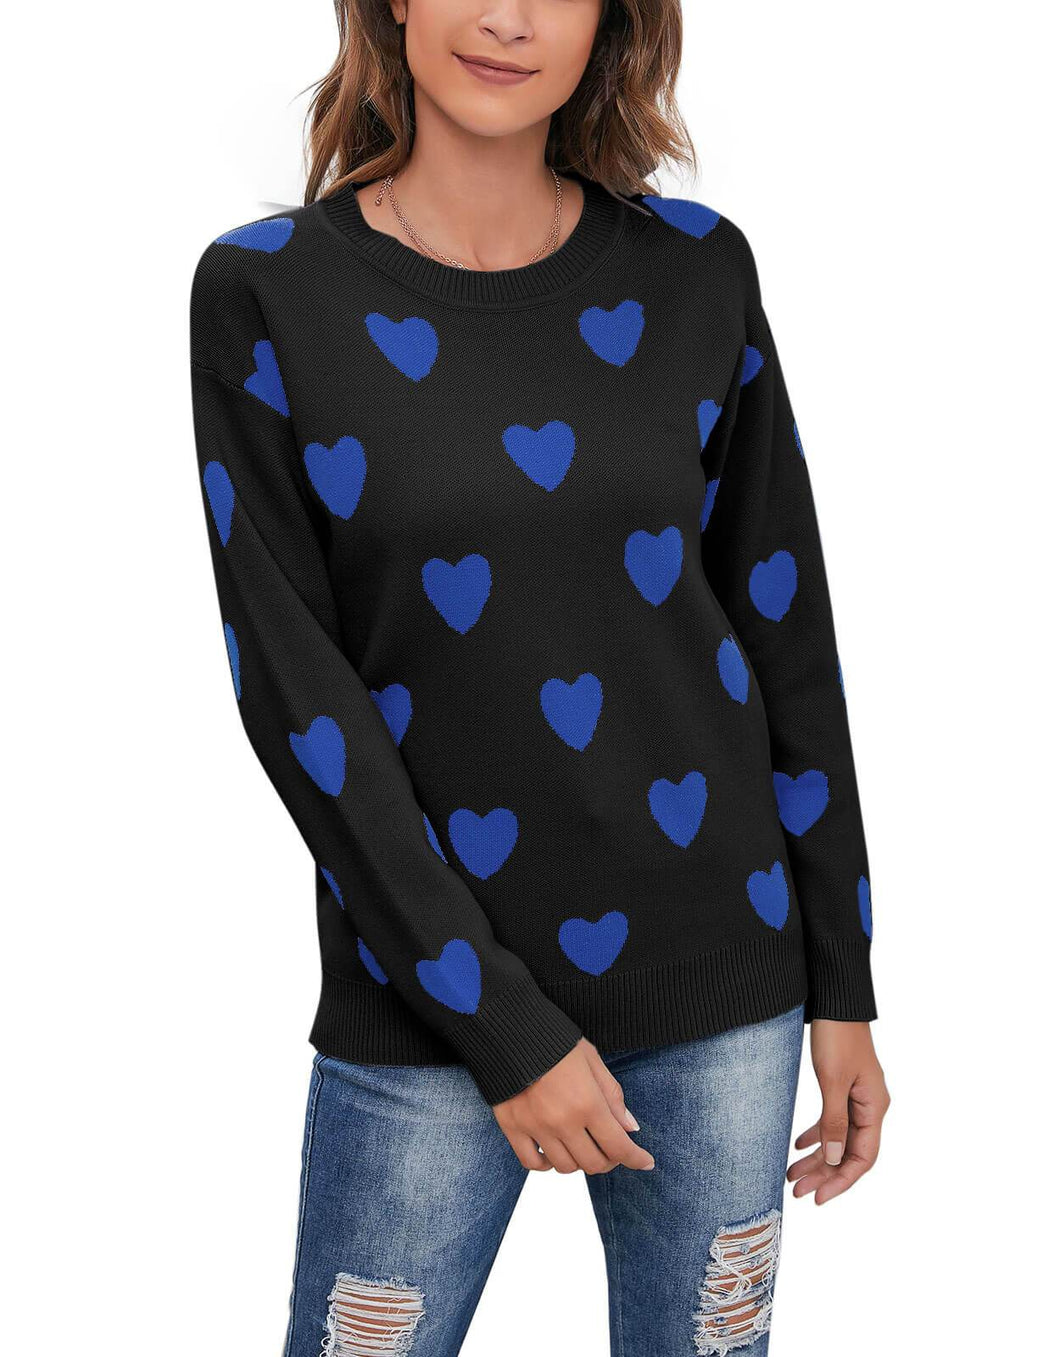 Heart Print Knitted Pullover, So cute!